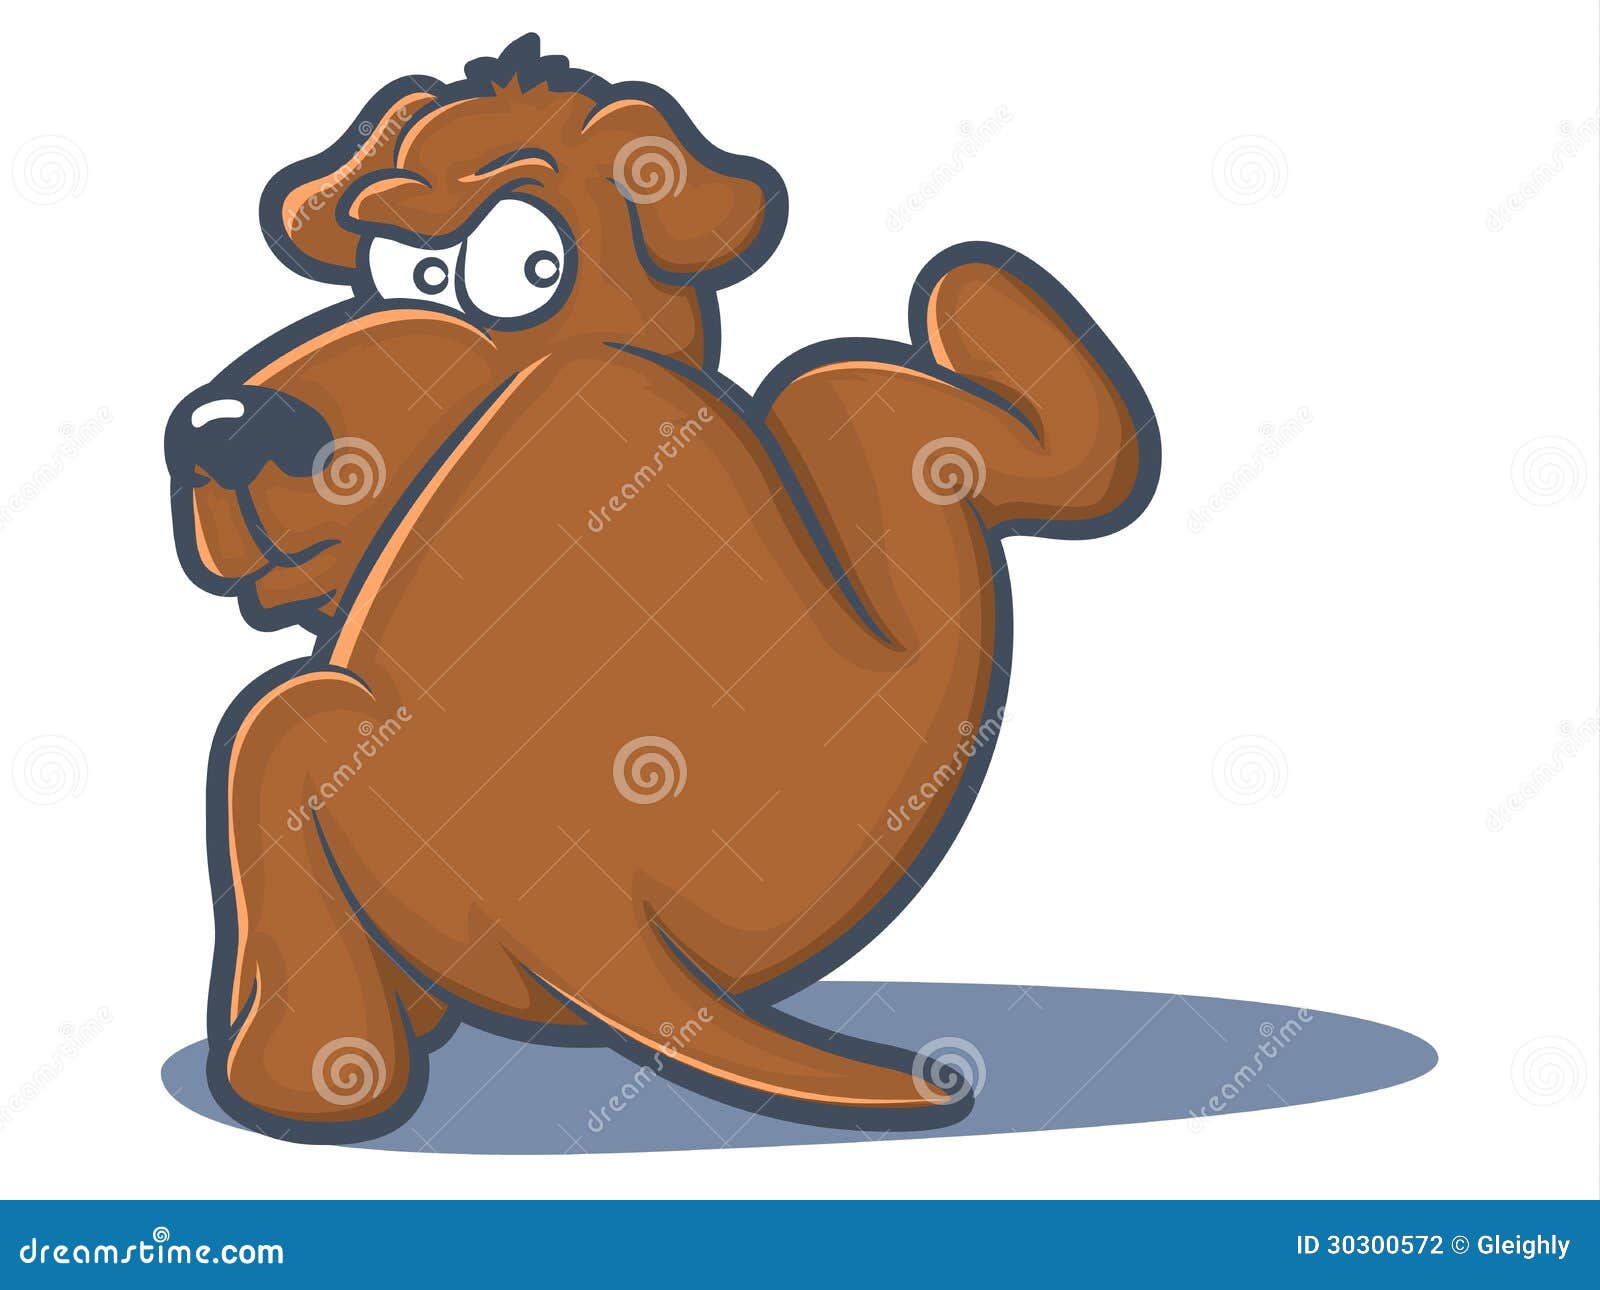 dog peeing clipart - photo #30